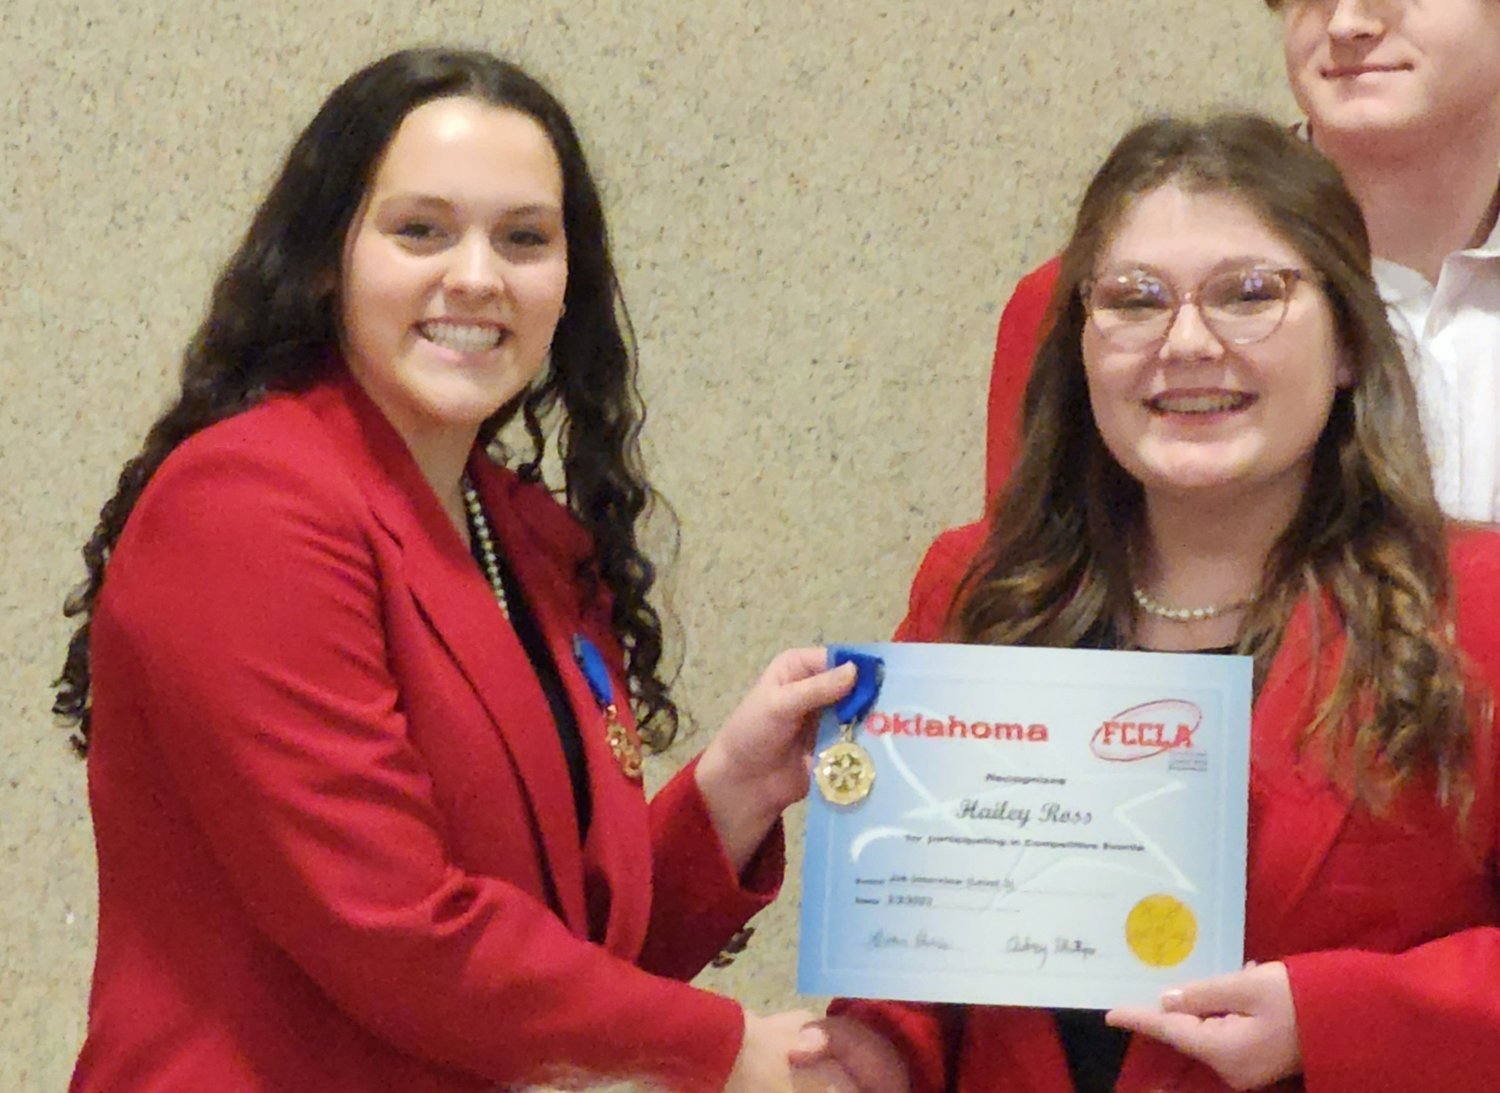 On Feb. 8, FCCLA District Officer Hailey Ross earned first place at the Regional STAR event competition in Job Interview with a whopping score of 99.5 percent. Ross now moves on to the state competition in Stillwater. She is a junior at Altus High School.